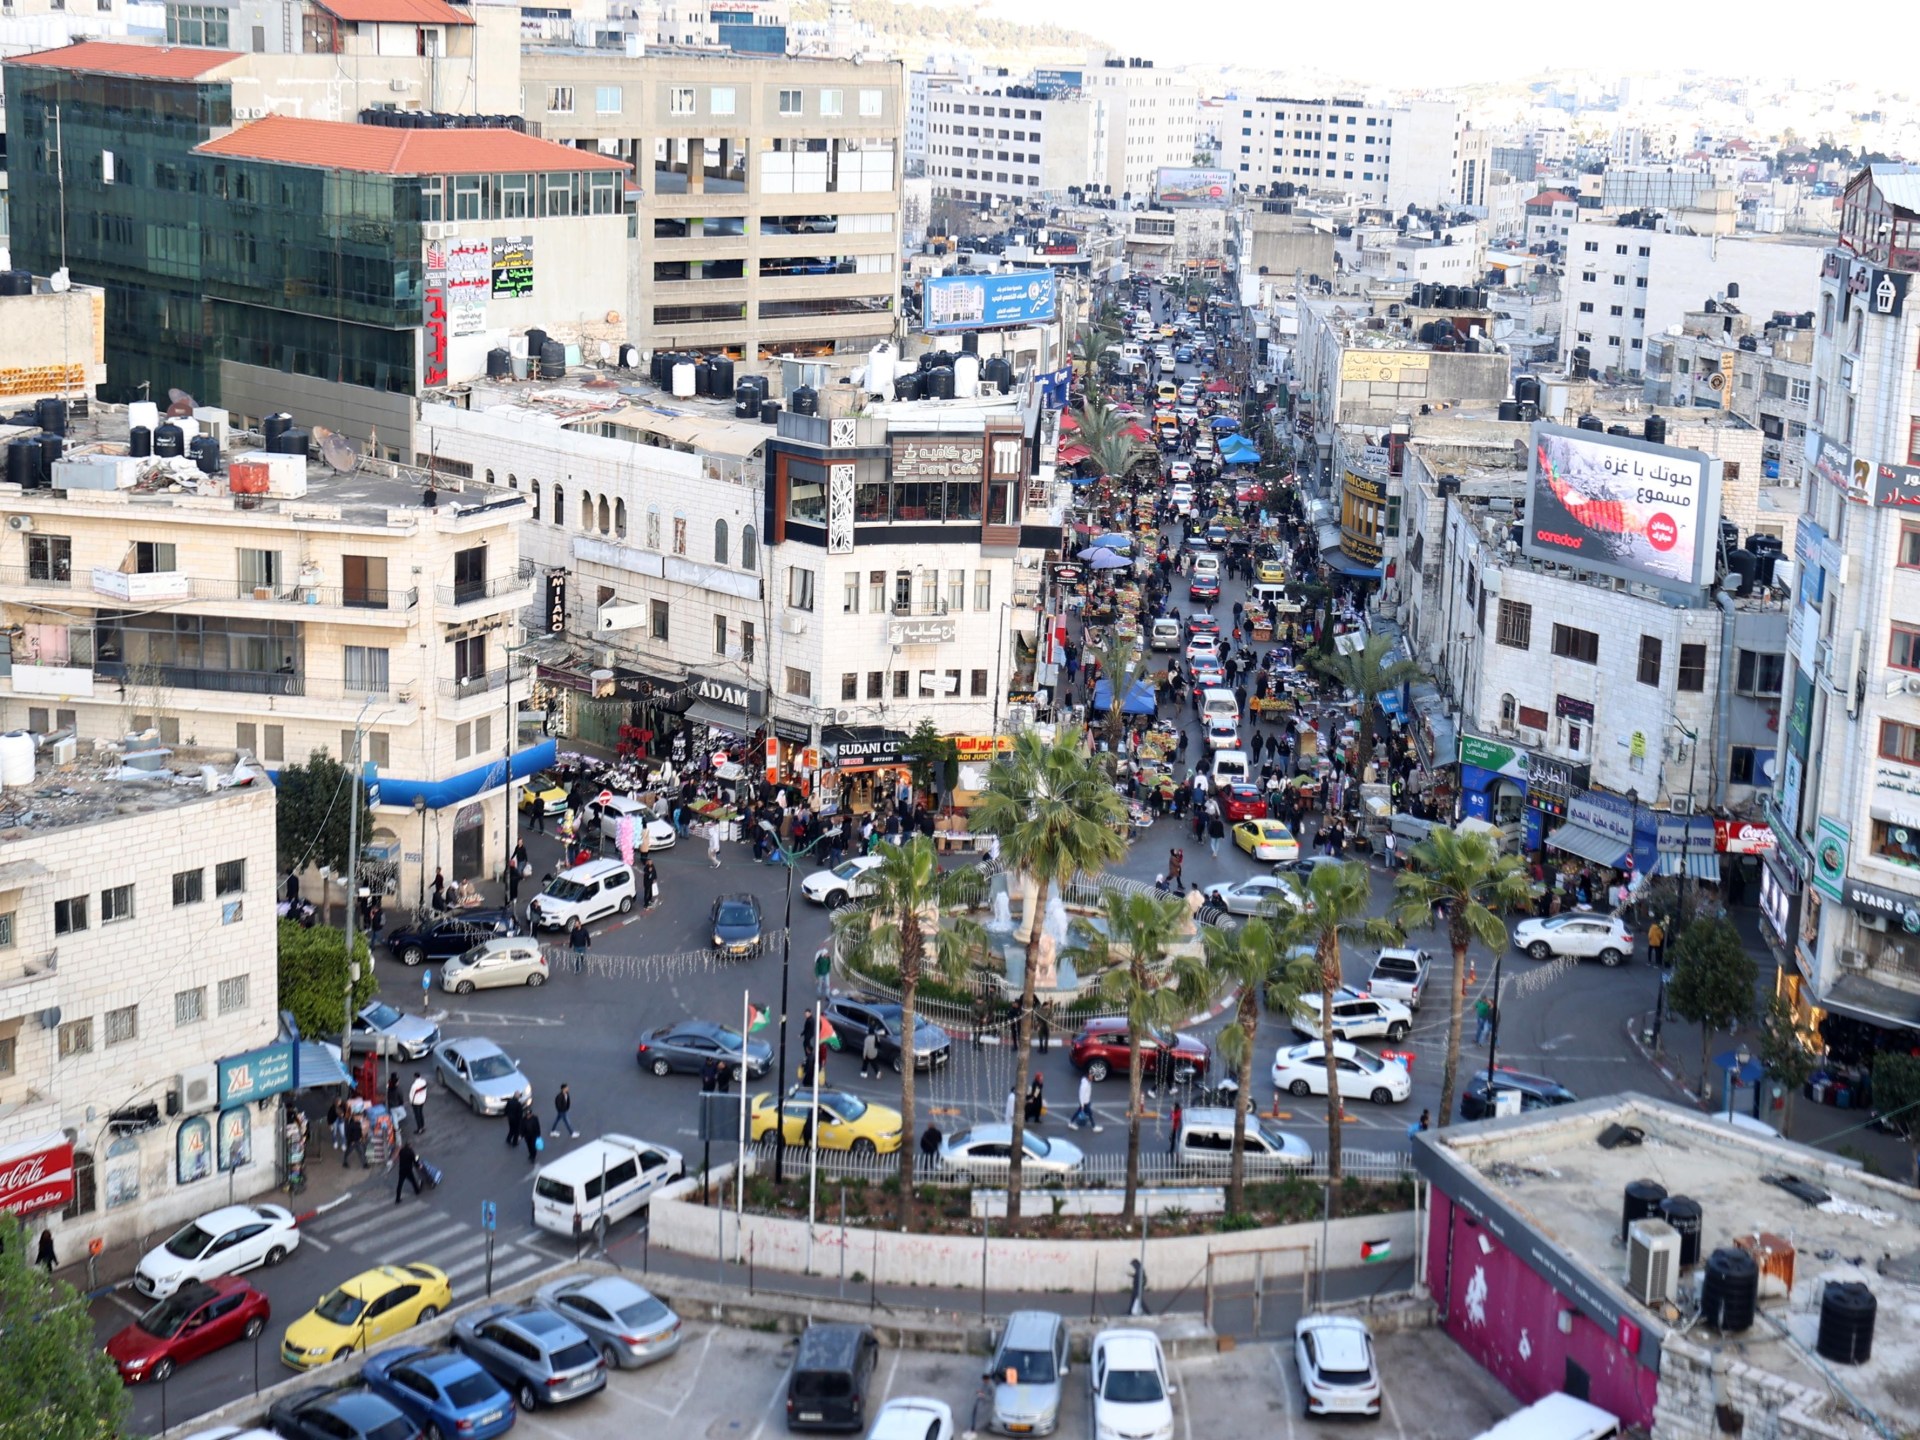 Will the Palestinian tech sector decouple from Israel?